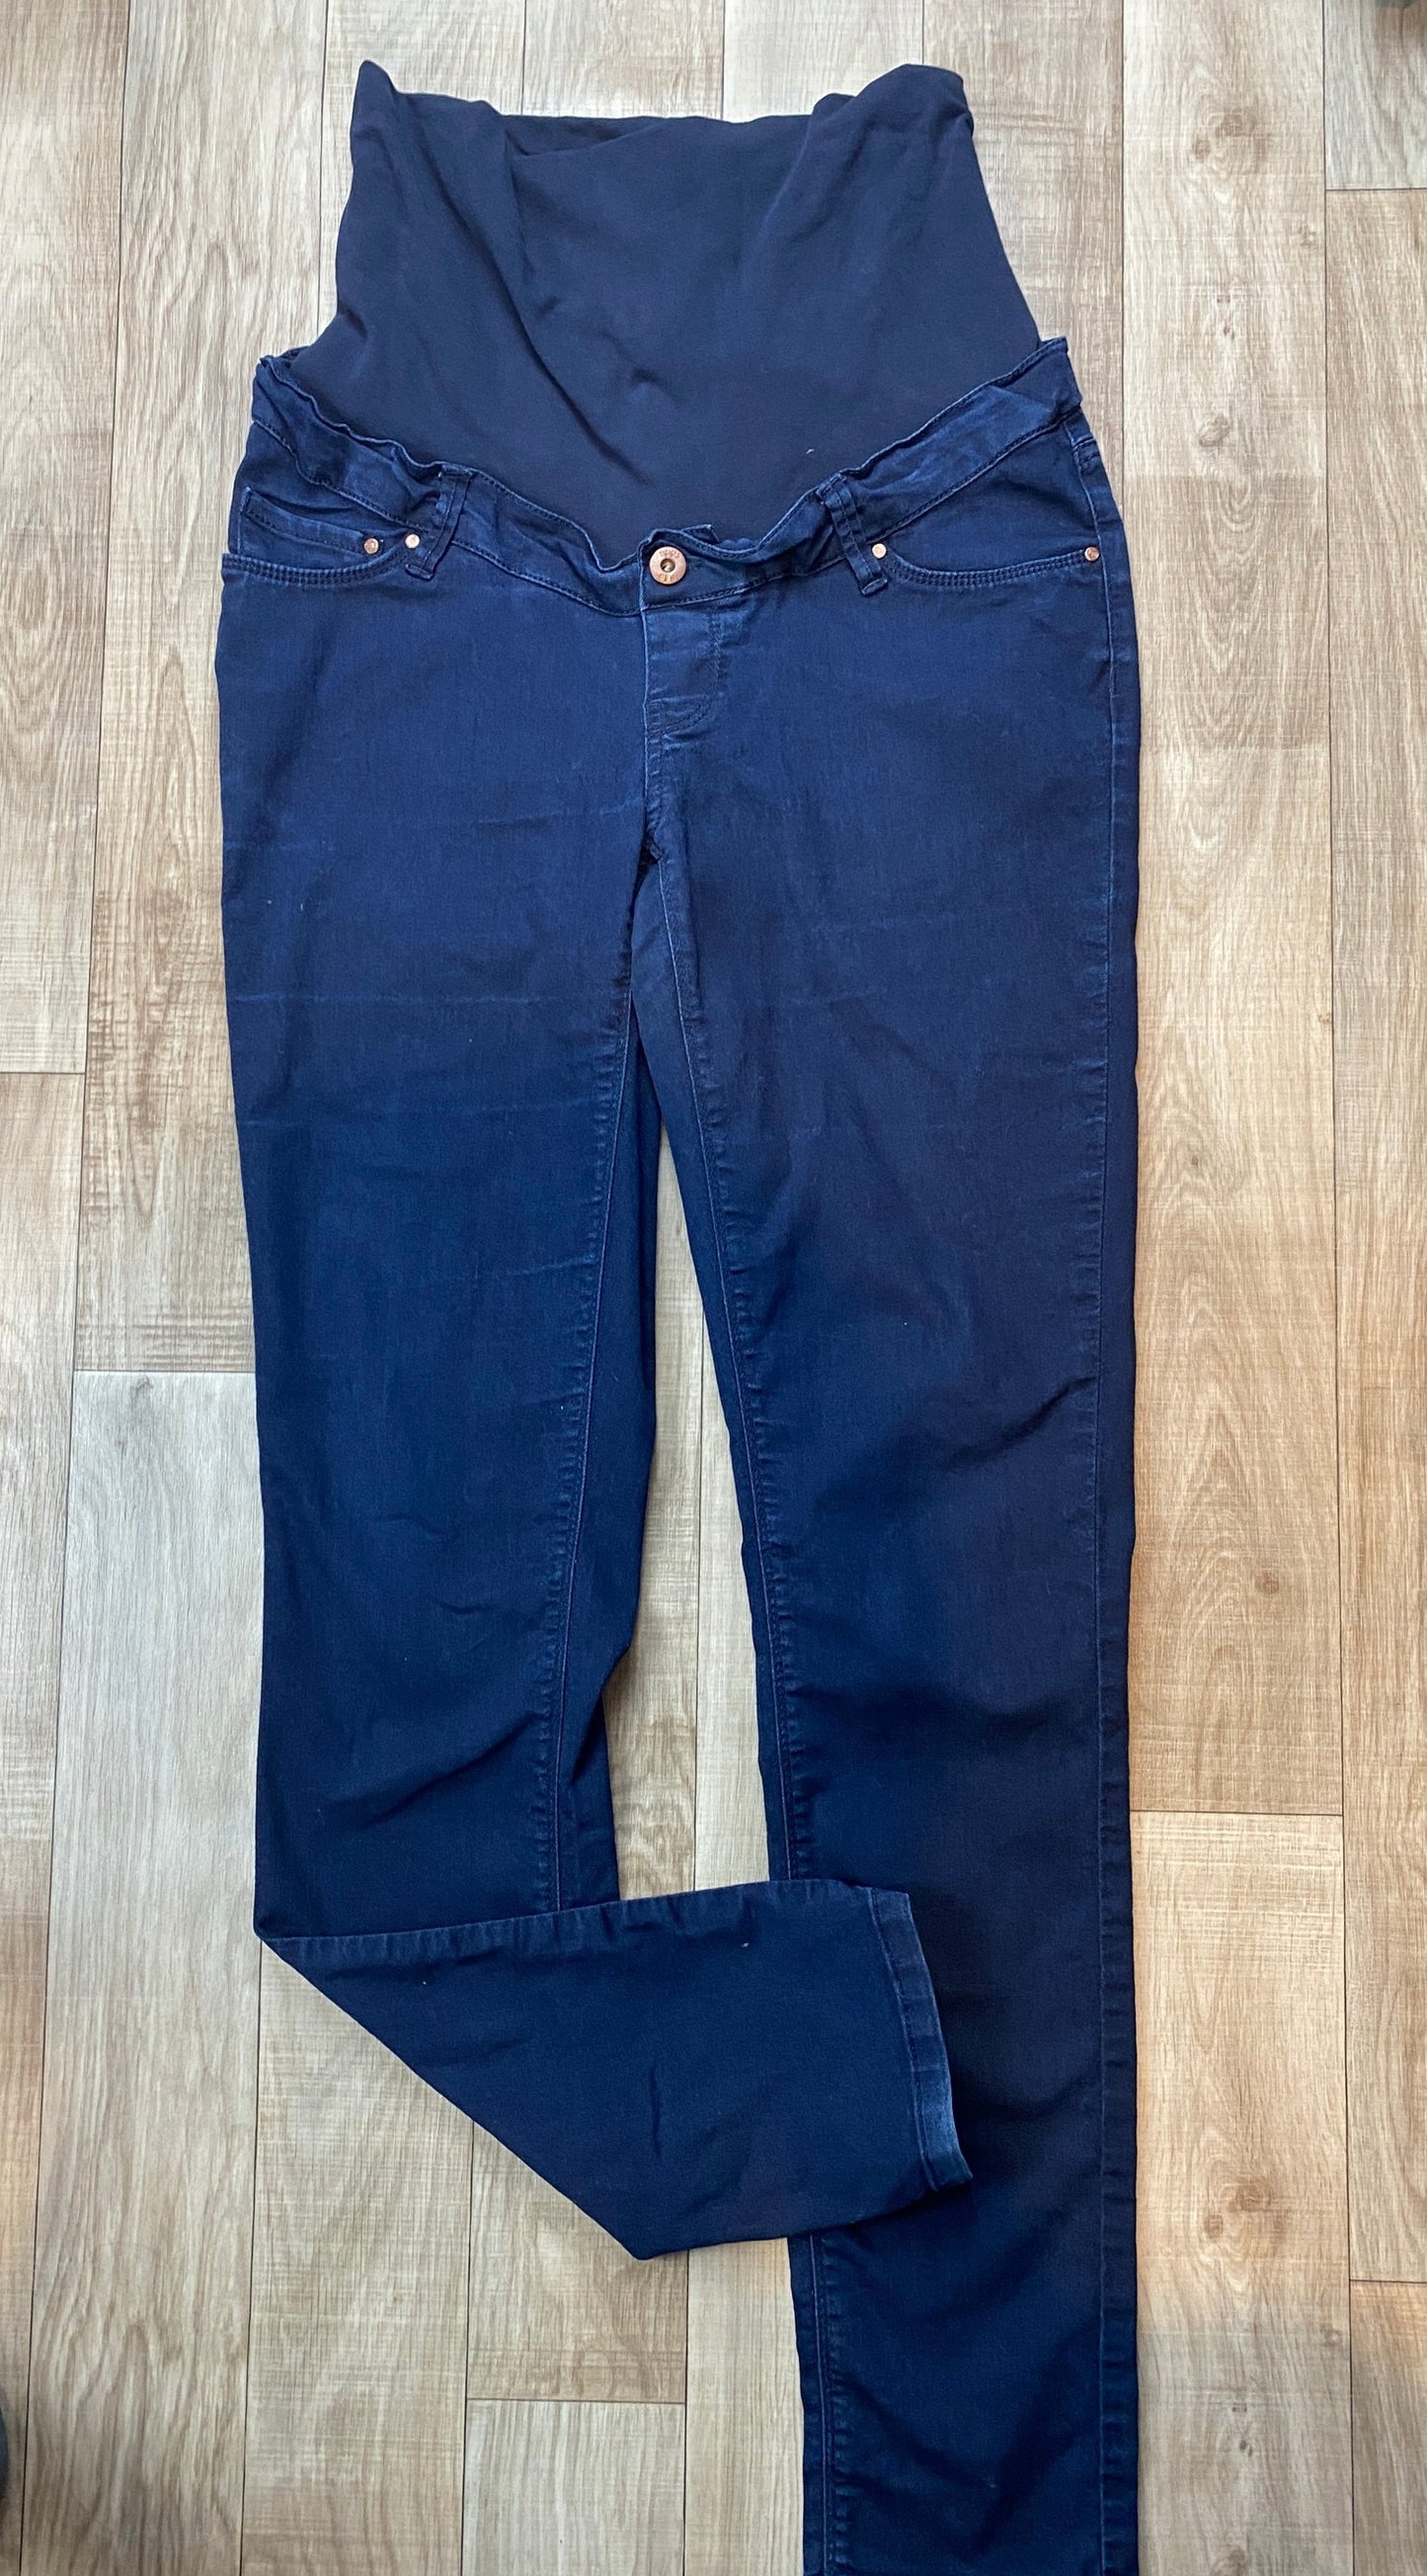 LARGE - Jeans Noppies